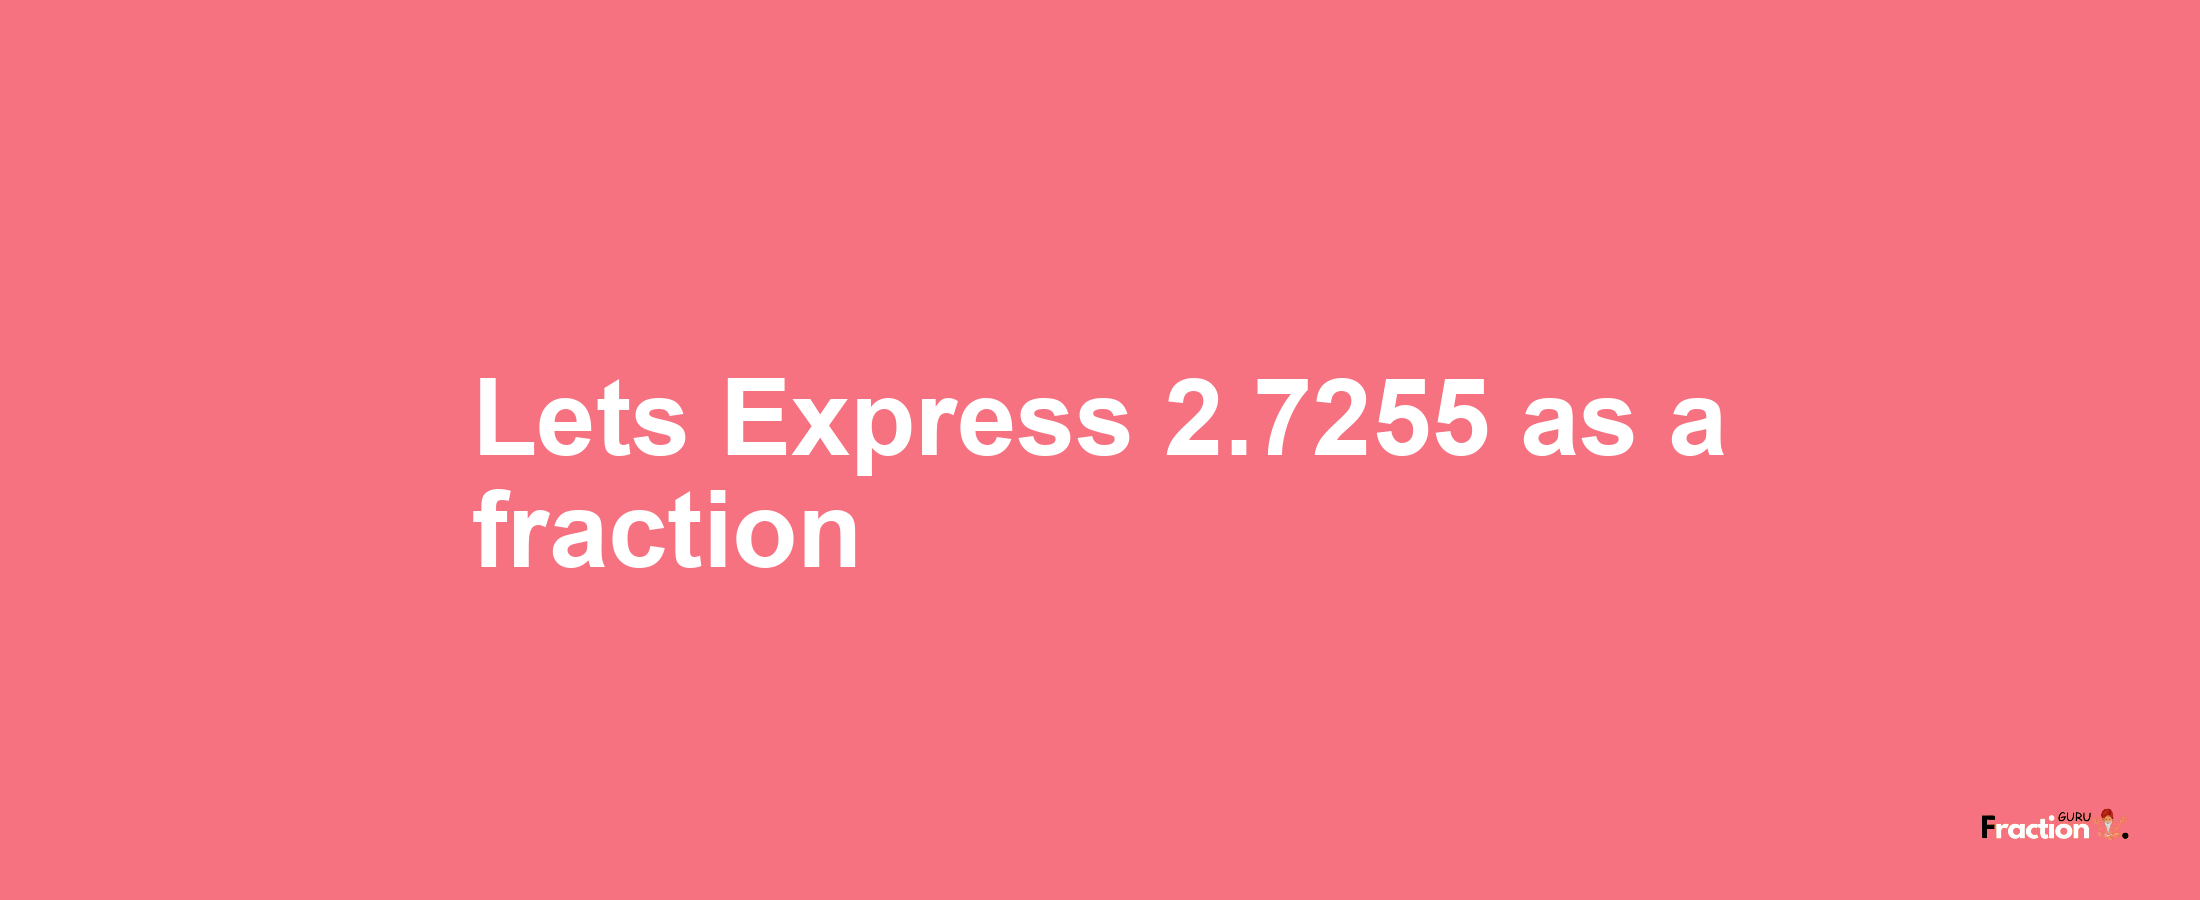 Lets Express 2.7255 as afraction